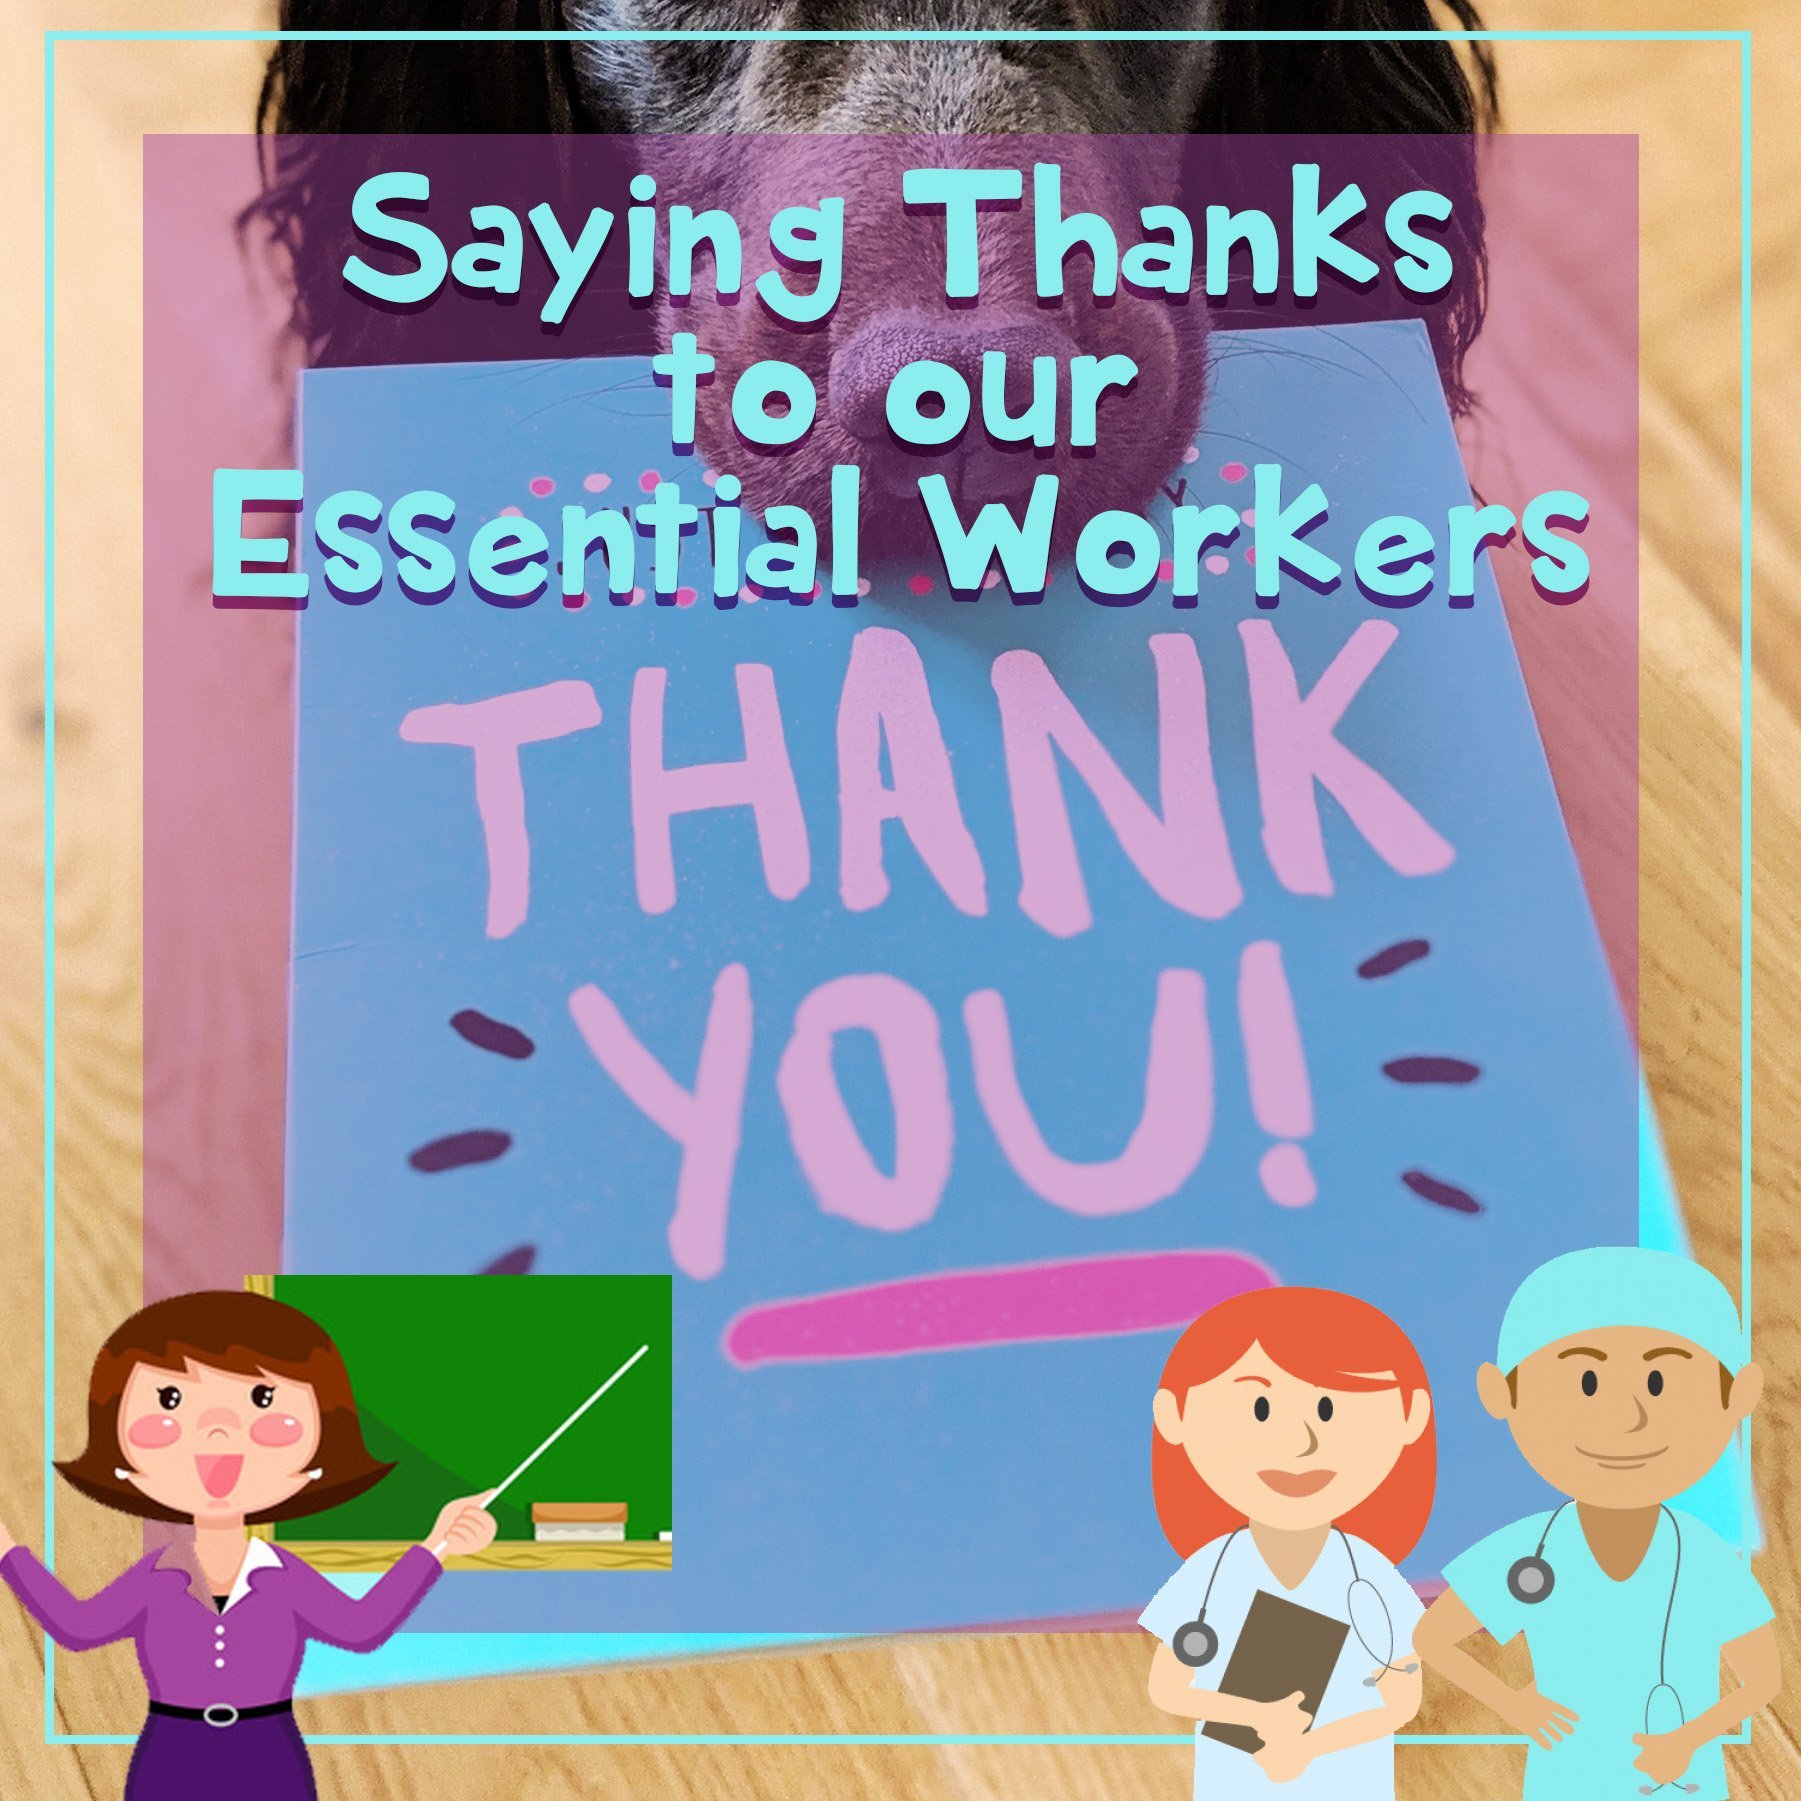 Saying Thanks to our Essential Workers